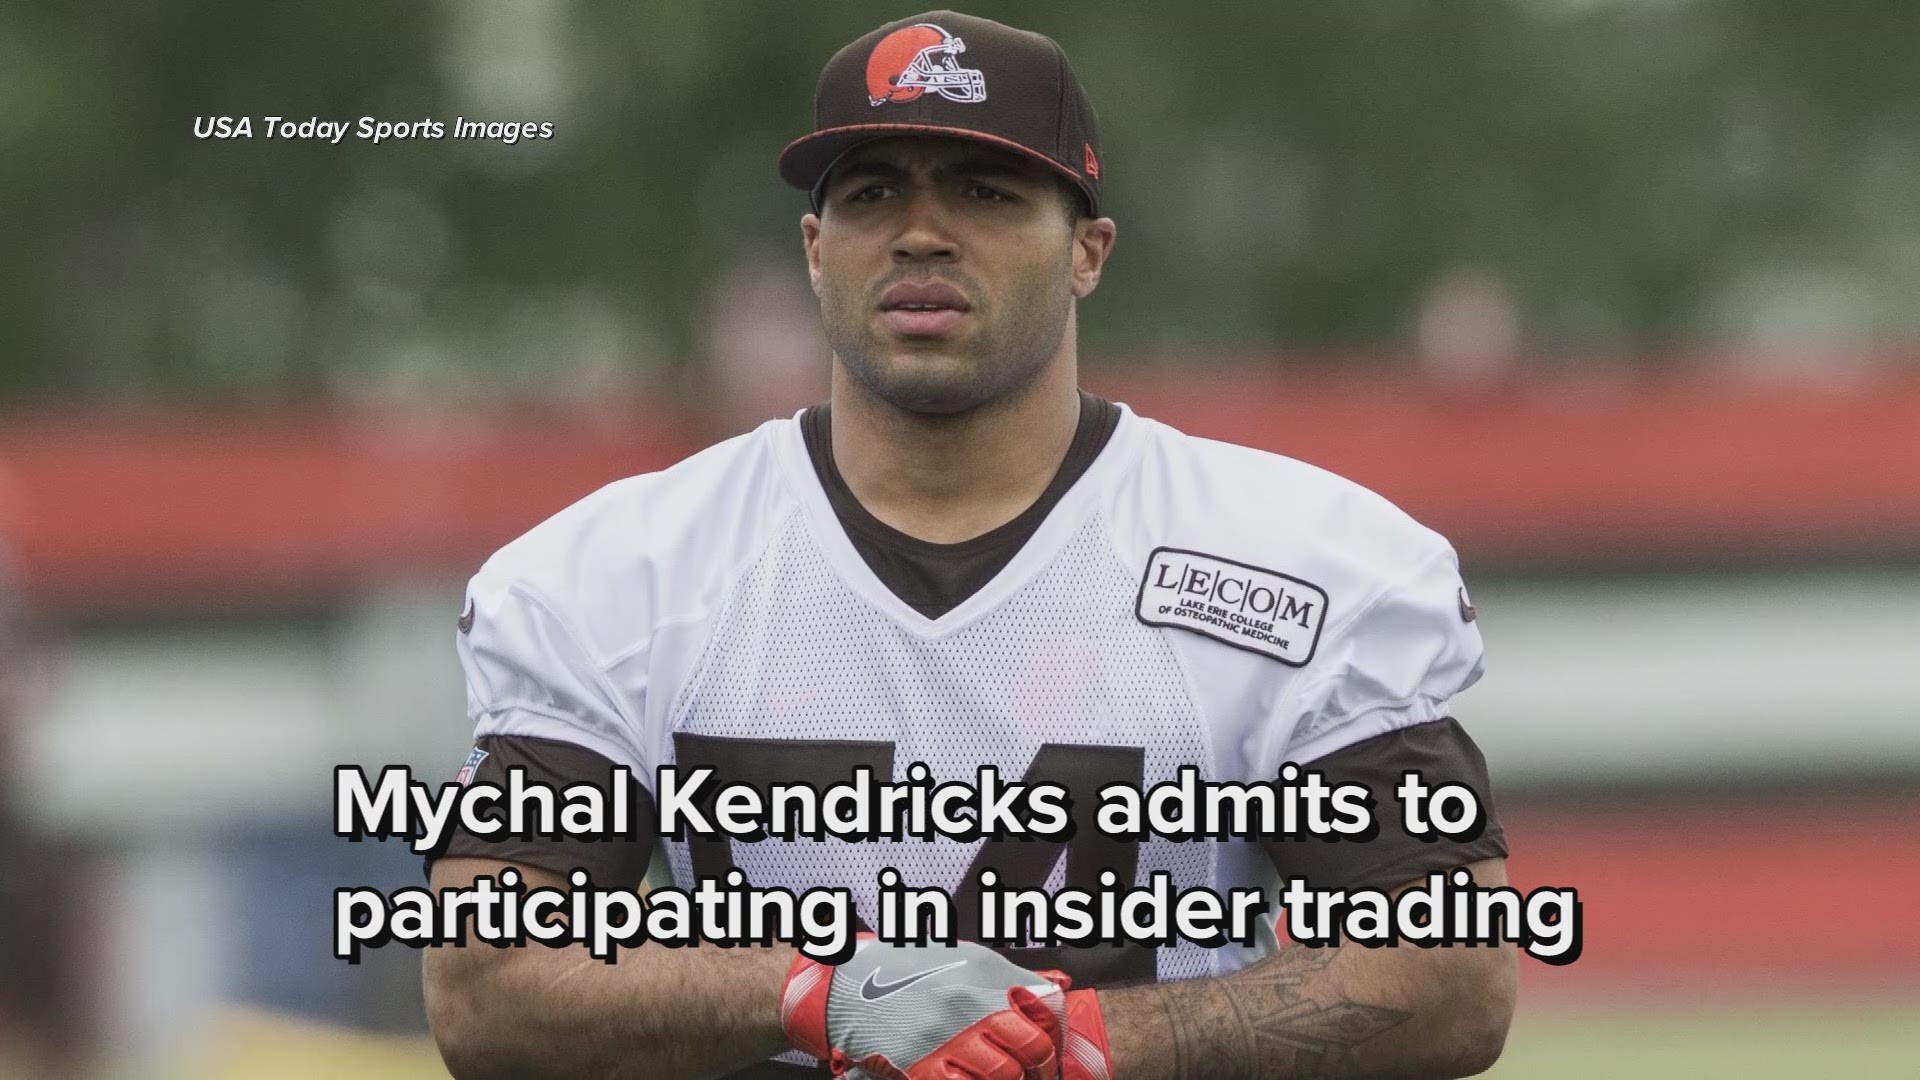 Cleveland Browns LB Mychal Kendricks indicted on insider trading charges